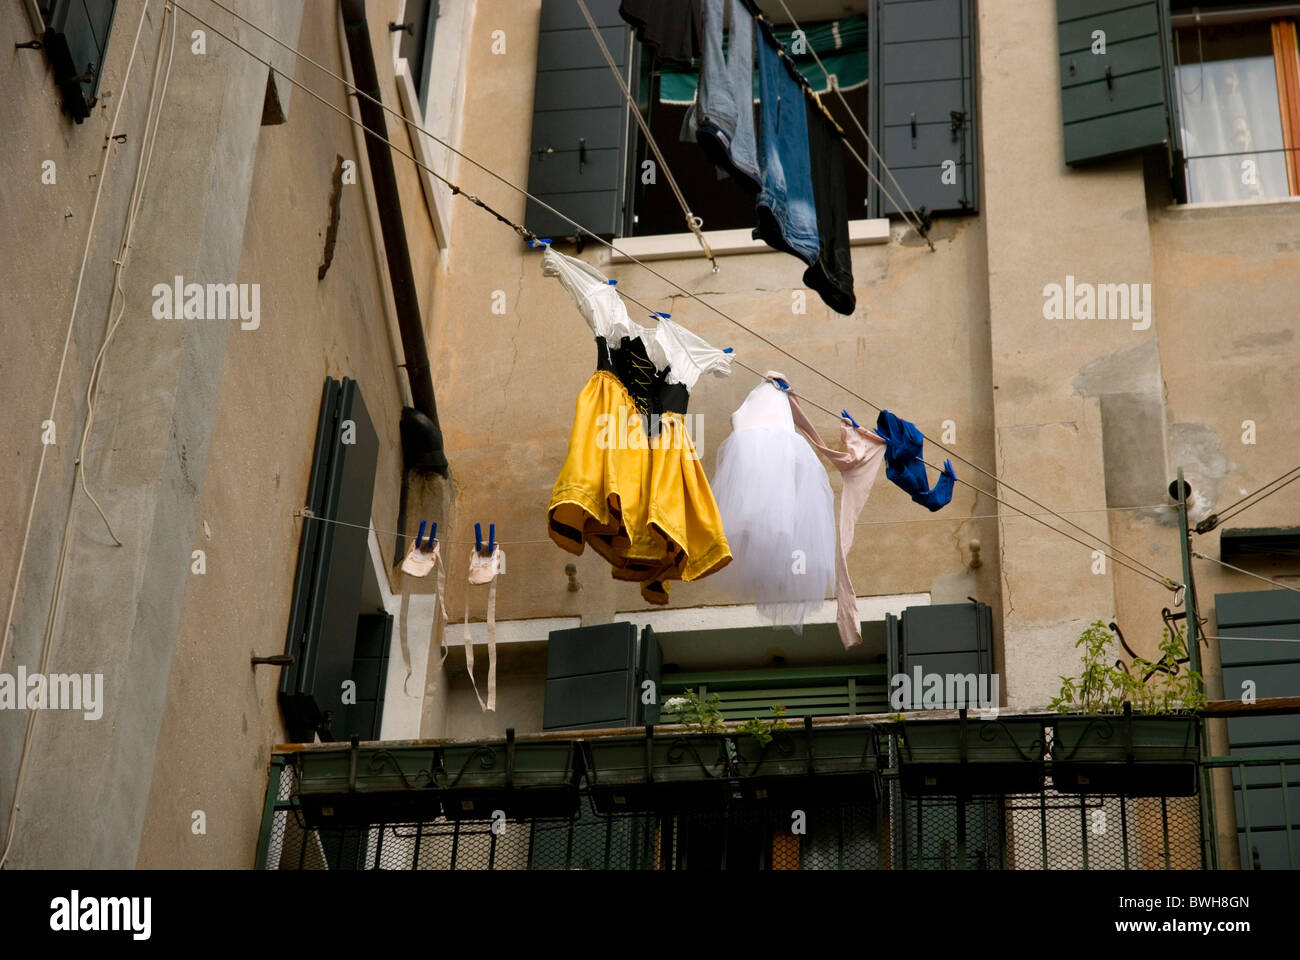 Theatrical costumes drying outside on a rope, Venice, Italy Stock Photo